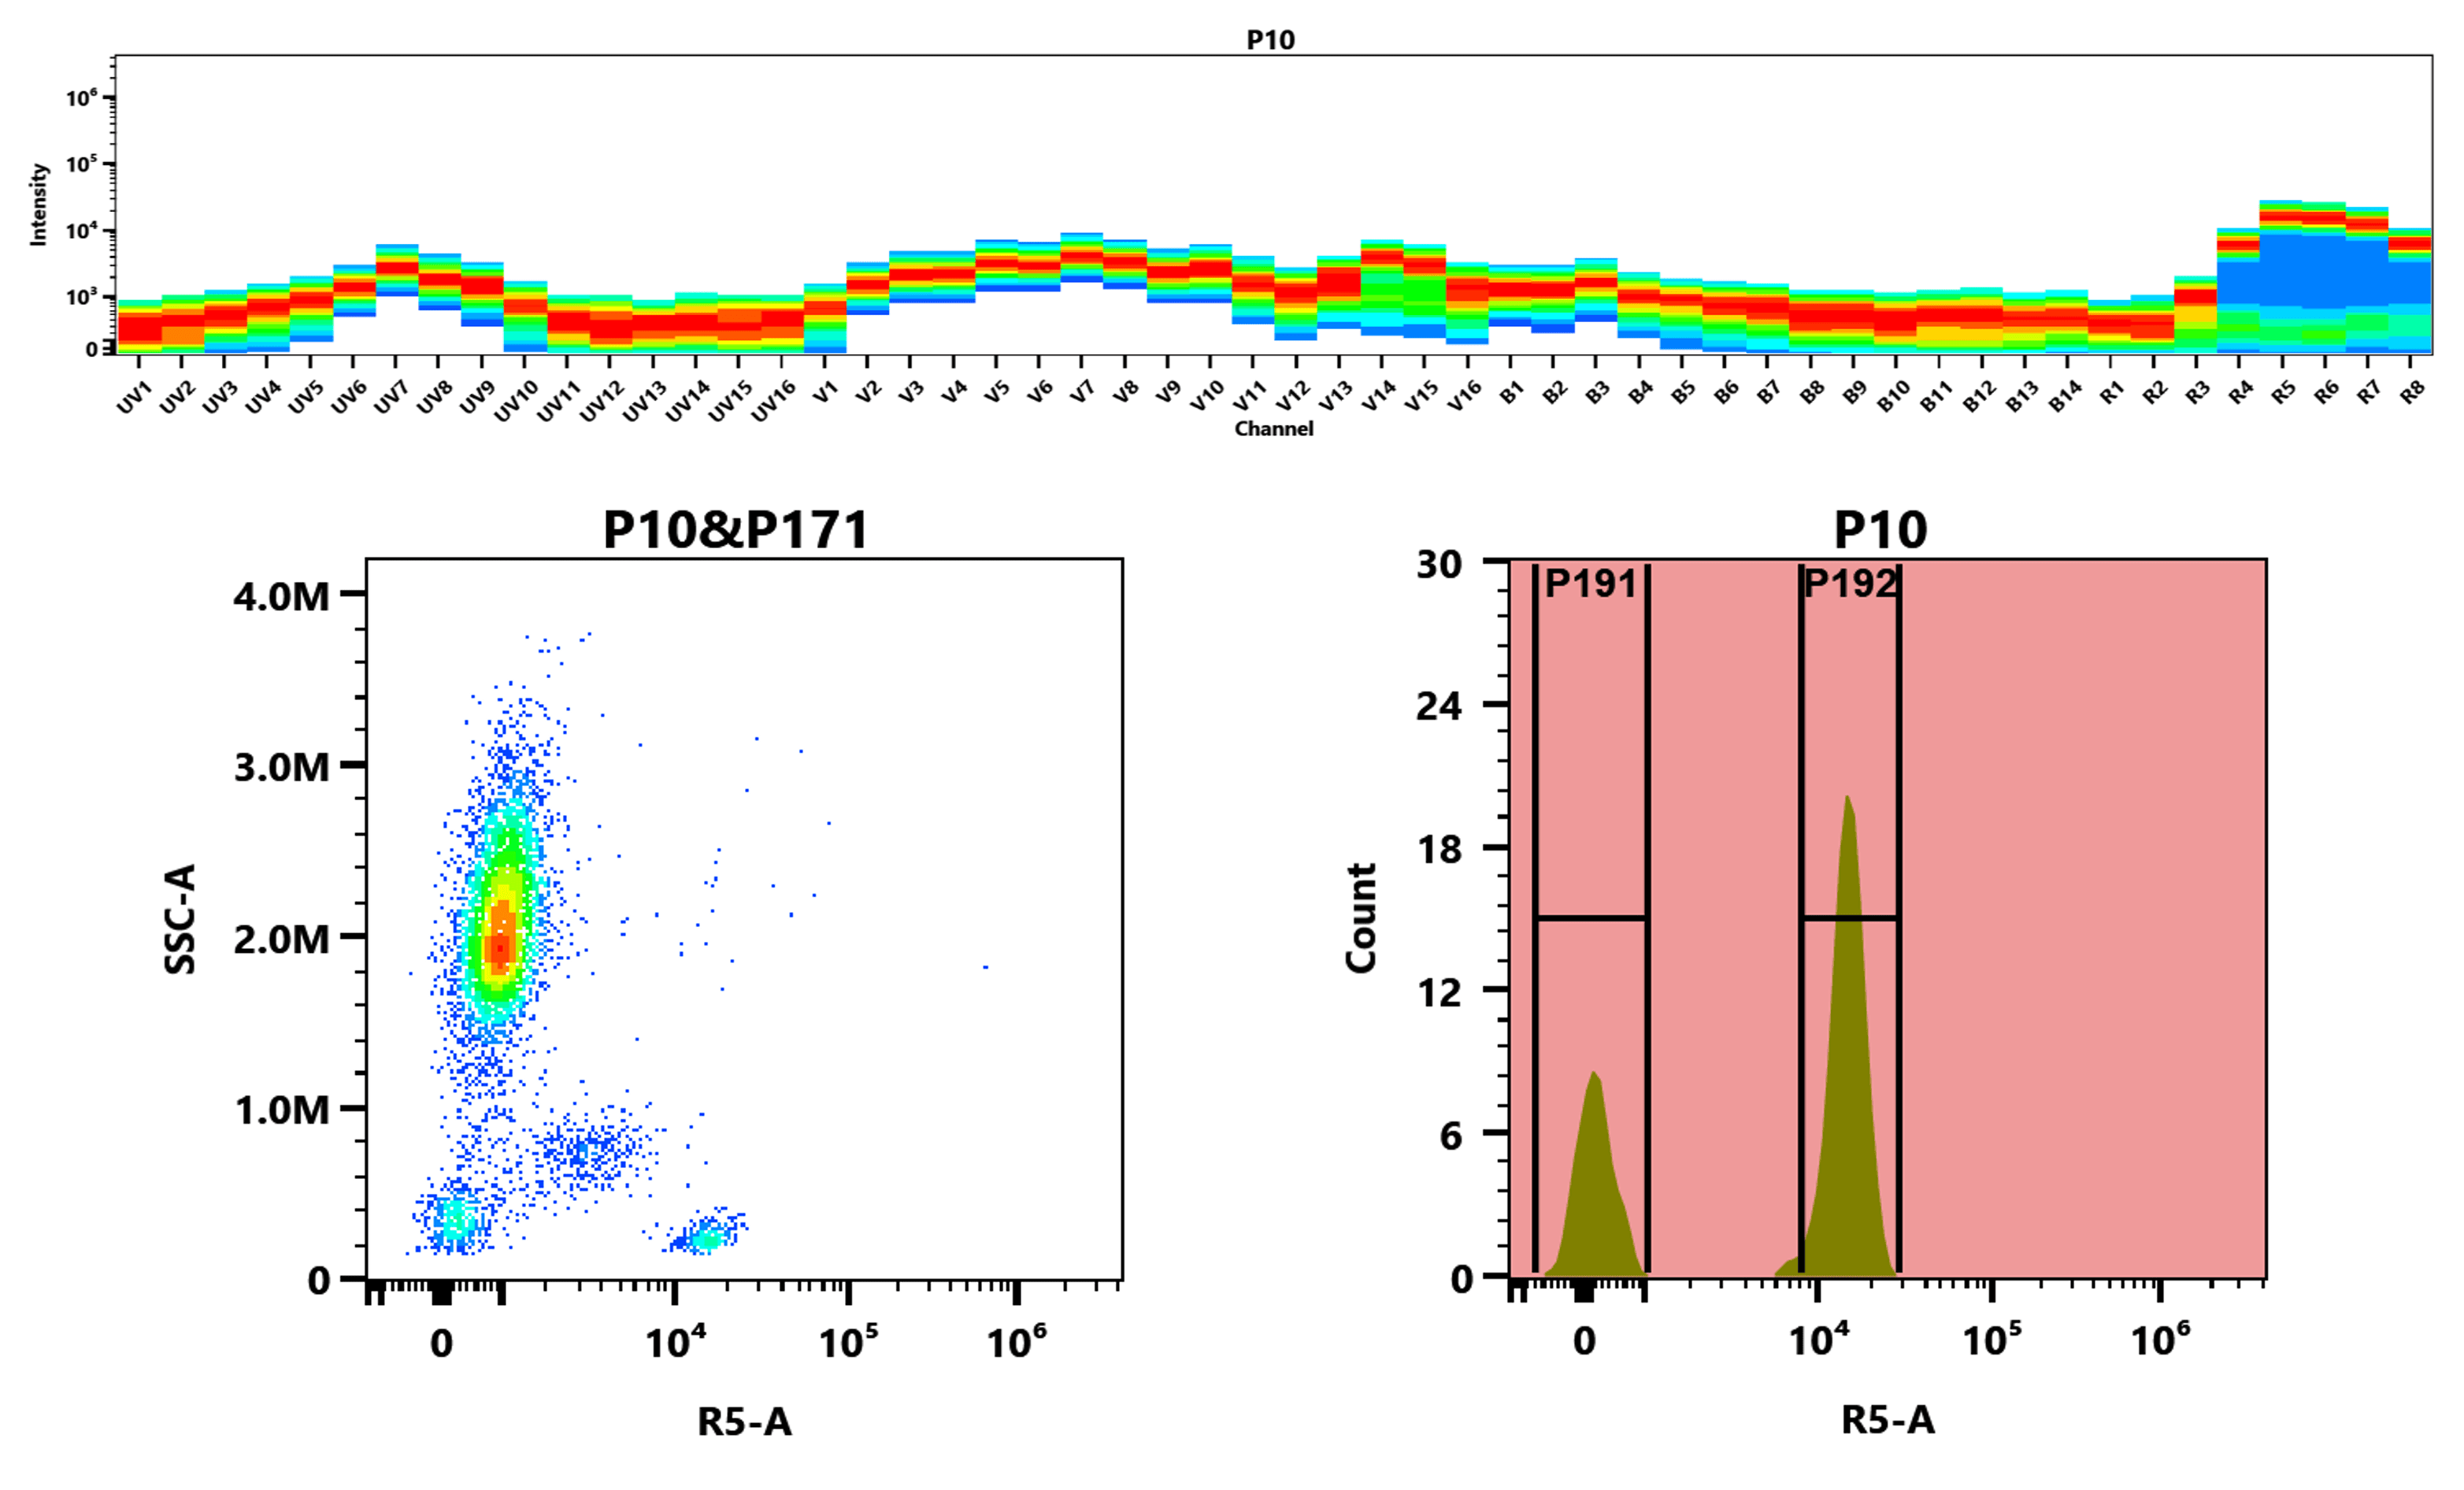 Top) The Spectral pattern was generated using a 4-laser spectral cytometer. Four spatially offset lasers (355 nm, 405 nm, 488 nm, and 640 nm) were used to create four distinct emission profiles, which, when combined, yielded the overall spectral signature. Bottom) Flow cytometry analysis of whole blood stained with iFluor® 710 anti-human CD4 *SK3* conjugate. The fluorescence signal was monitored using an Aurora spectral flow cytometer in the iFluor® 710 R5-A channel.